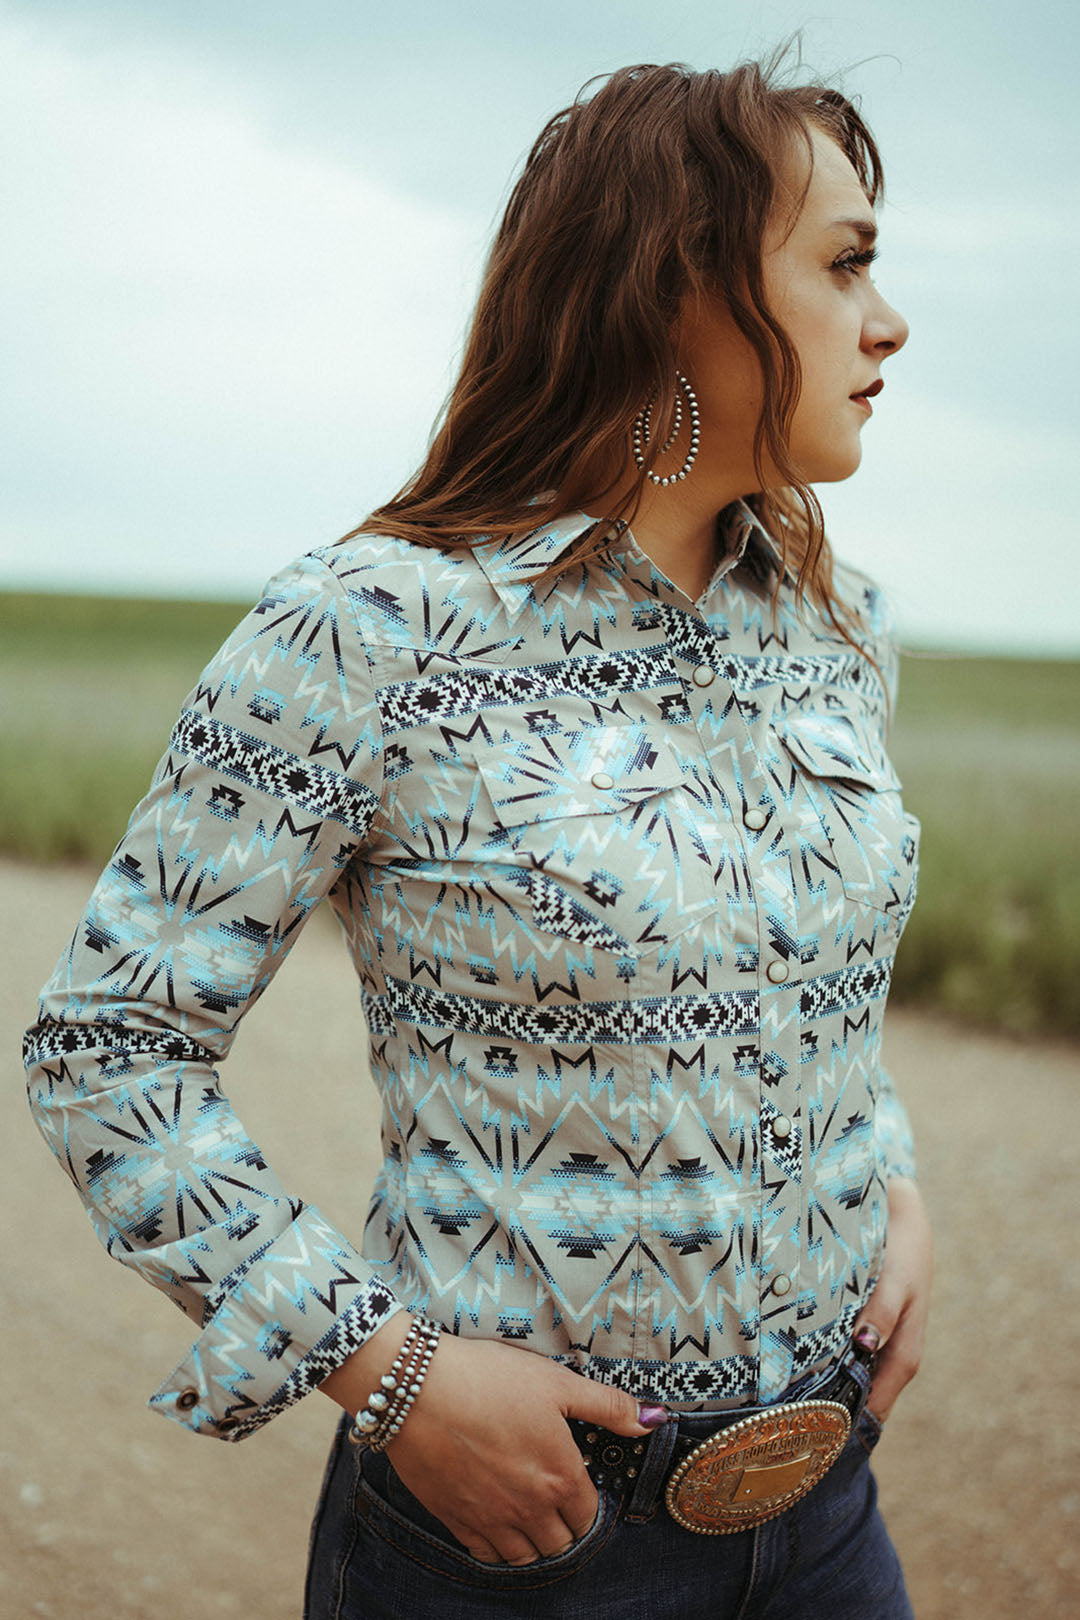 Woman standing on dirt road modeling the Aztec Print Snap Shirt.  